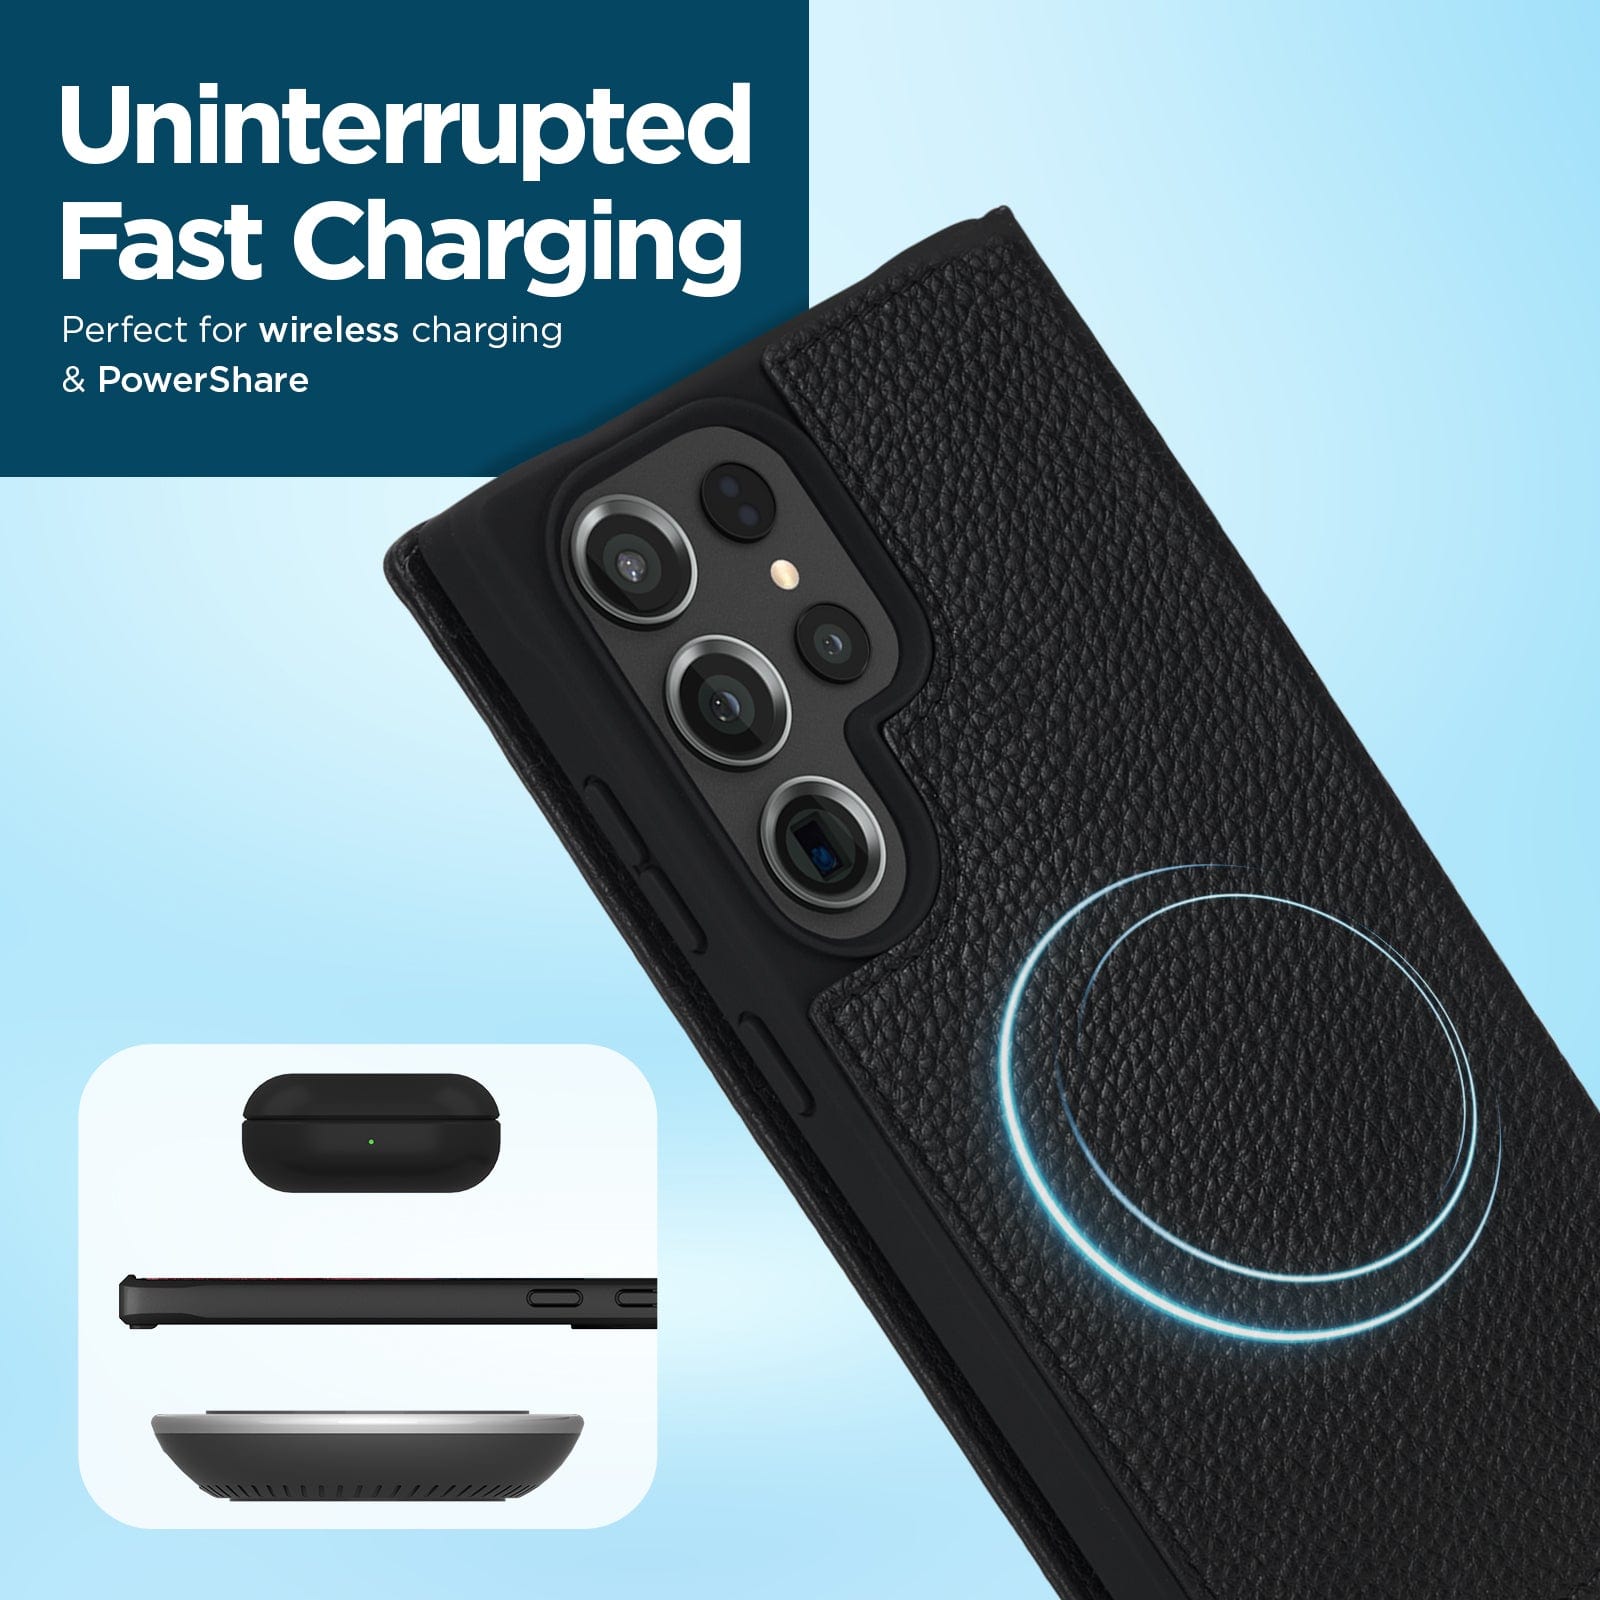 UNINTERRUPTED FAST CHARGING PERFECT FOR WIRELESS CHARGING & POWERSHARE.